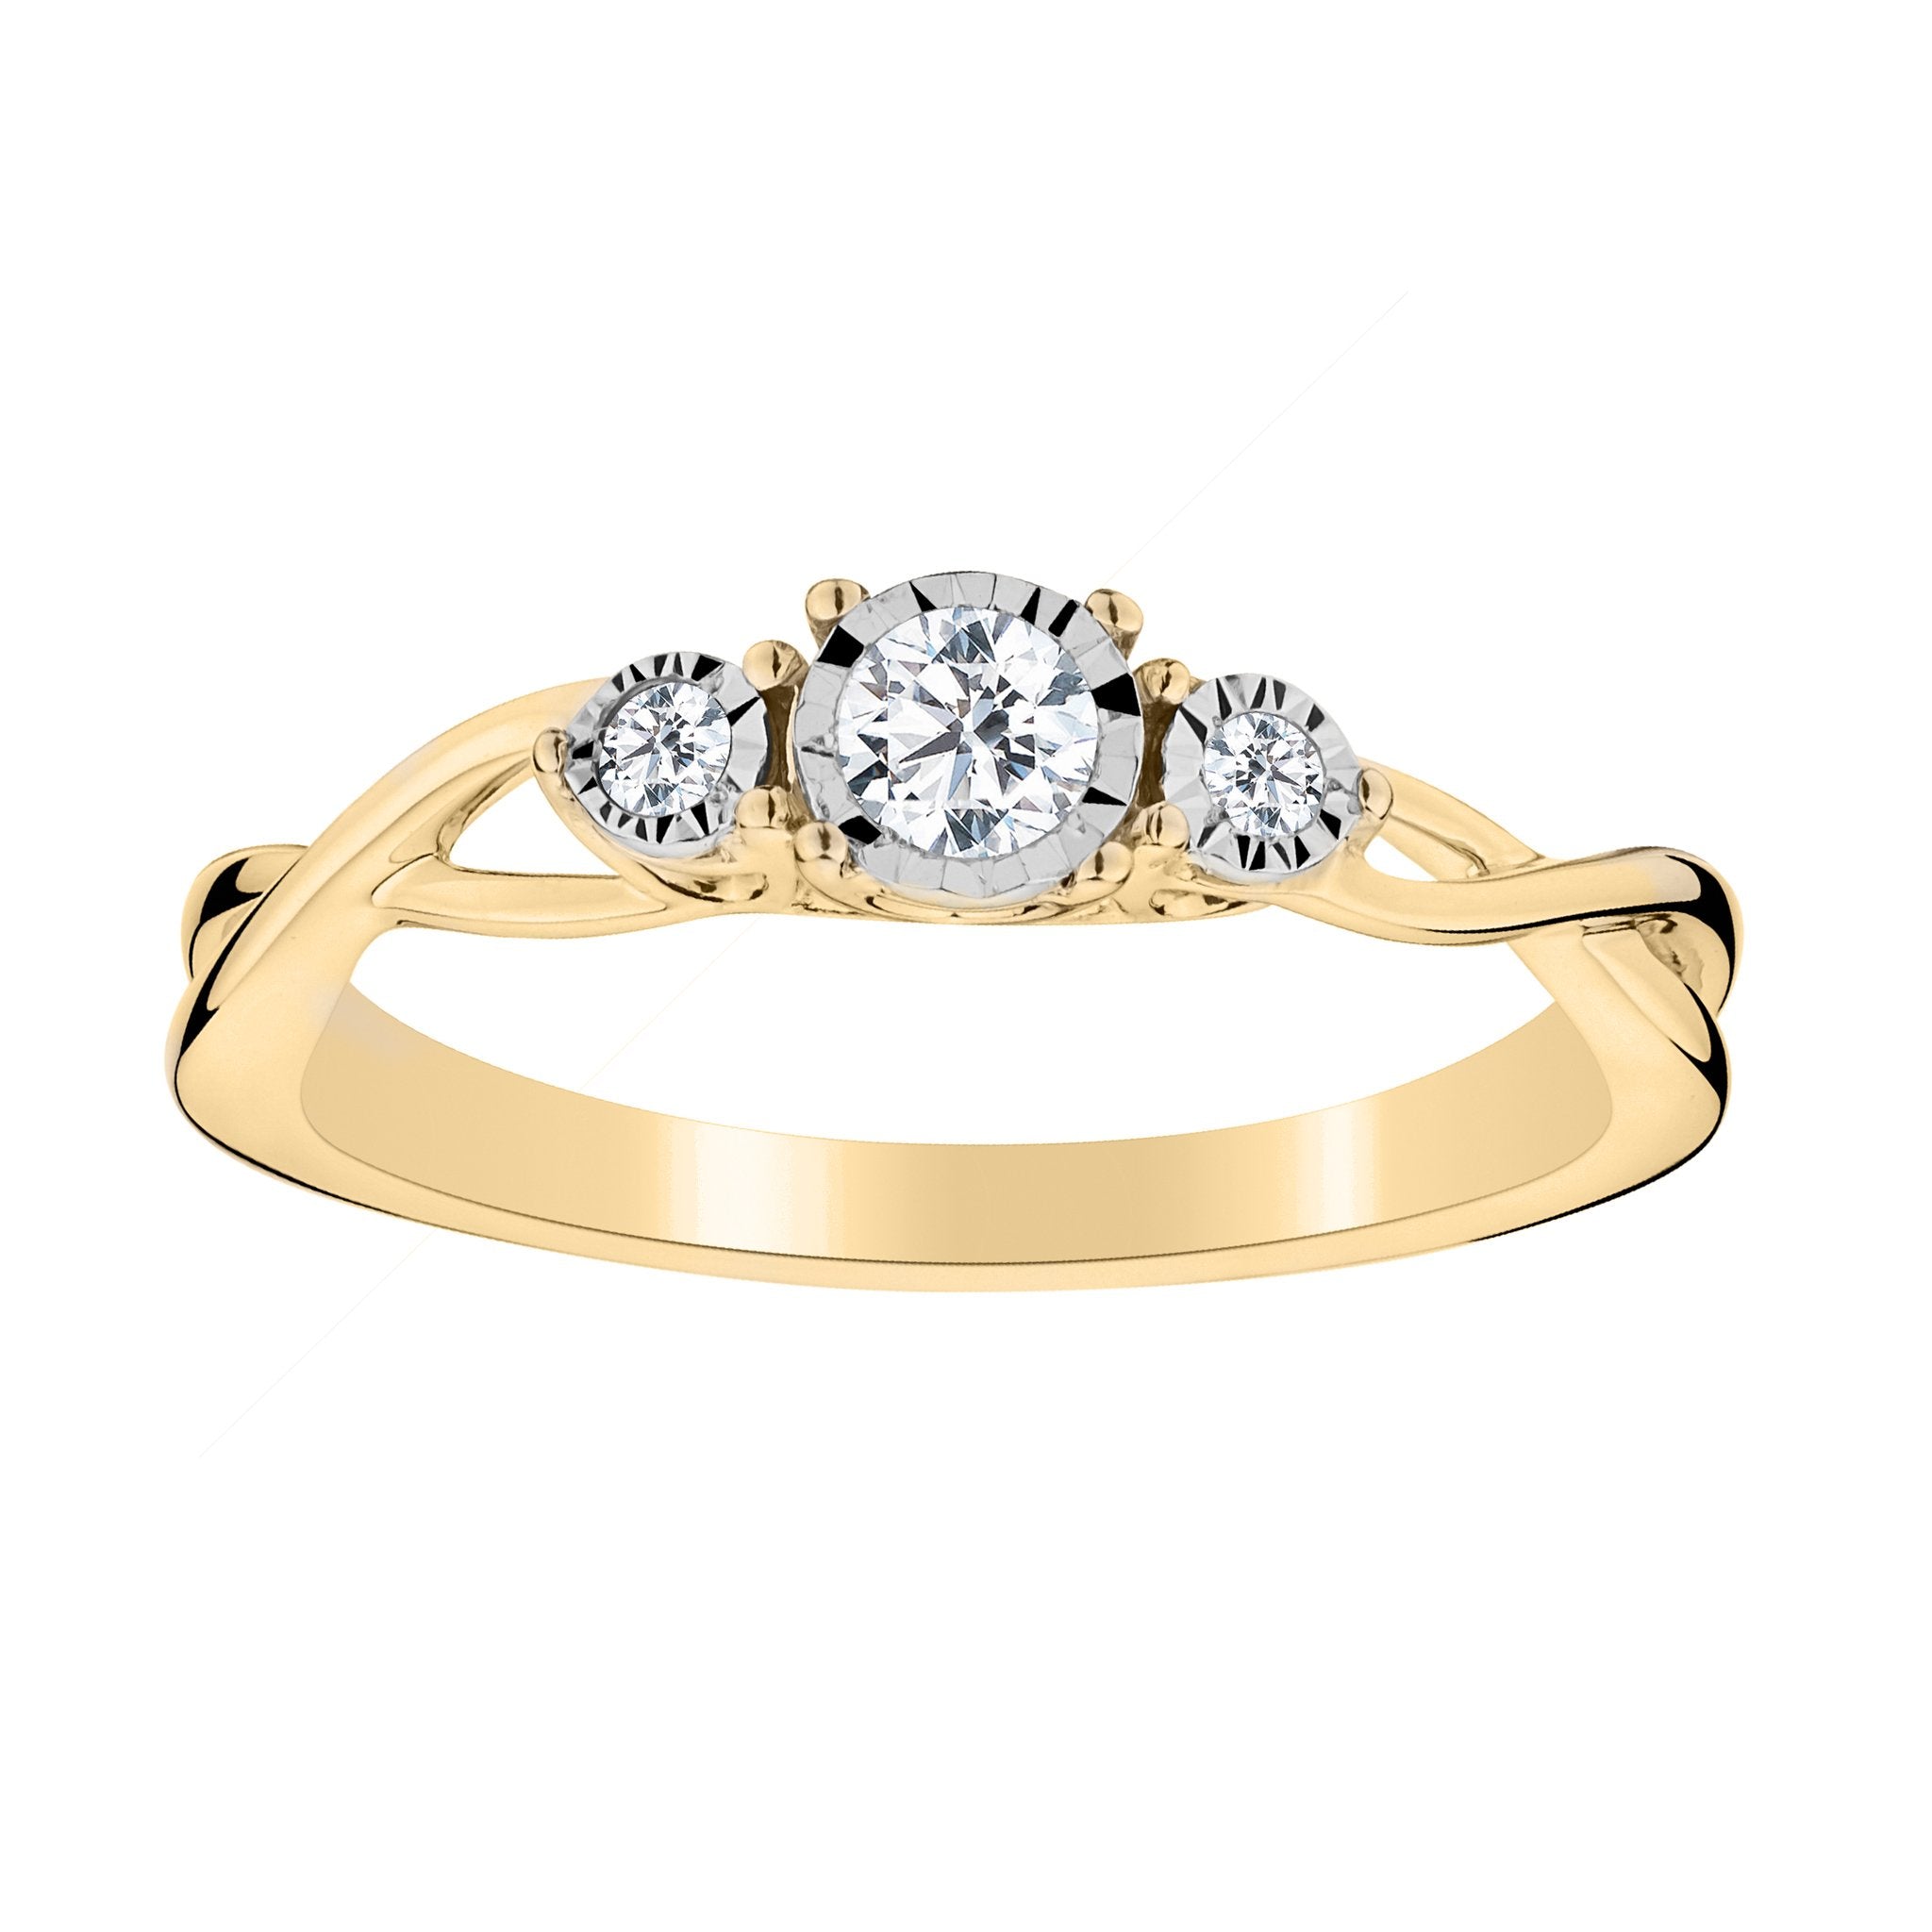 .20 CARAT DIAMOND "PAST, PRESENT, FUTURE" INFINITY RING, 10kt YELLOW GOLD...................NOW - Griffin Jewellery Designs